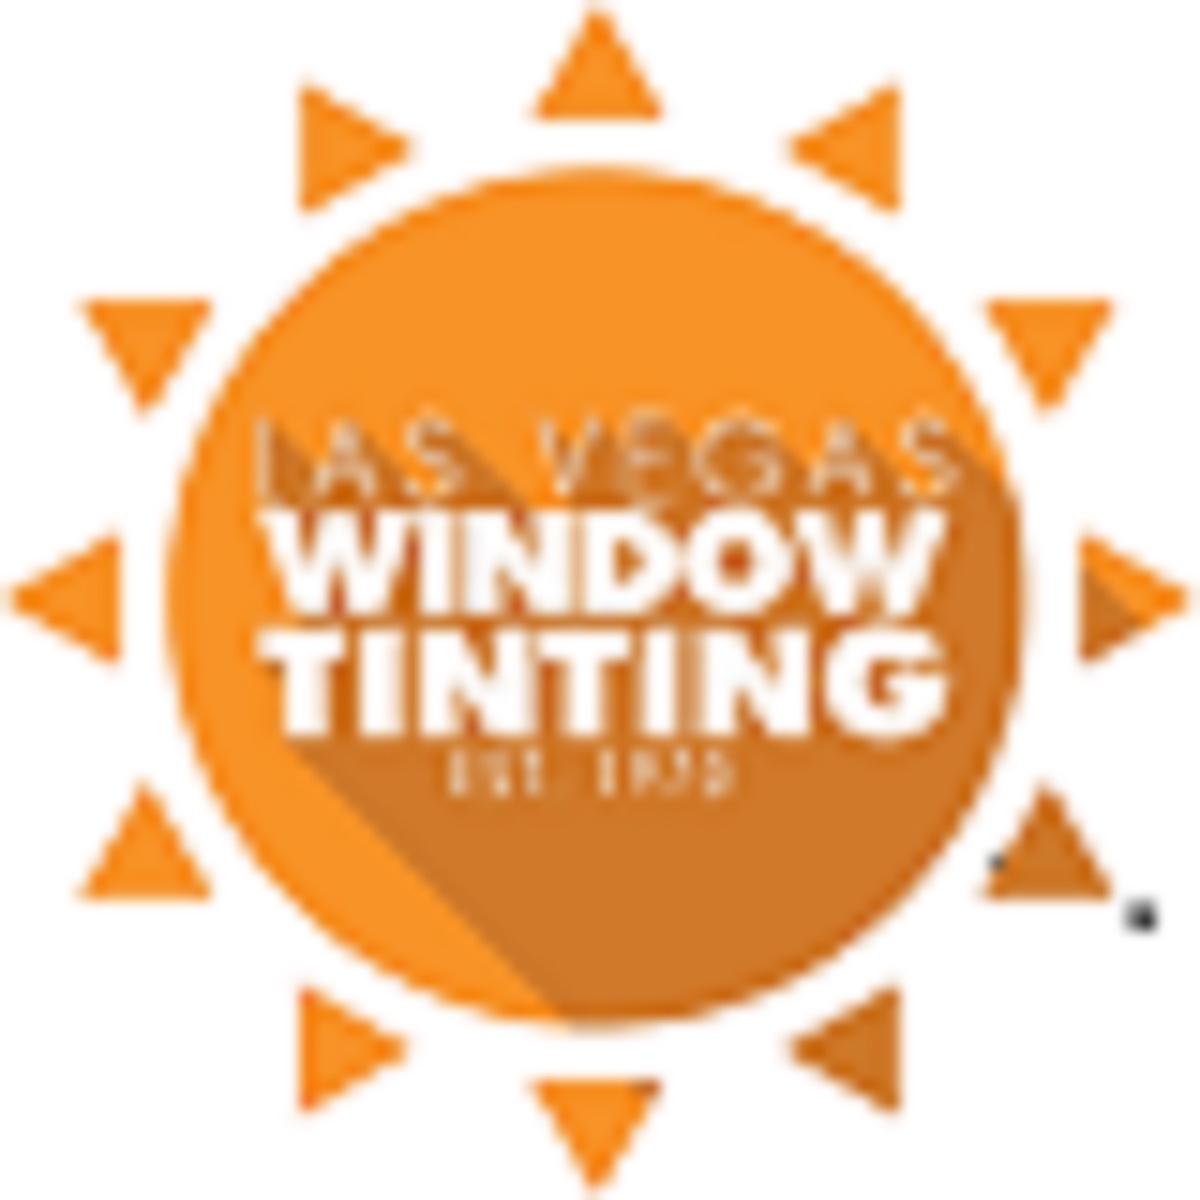 The Many Benefits of Home Window Tinting